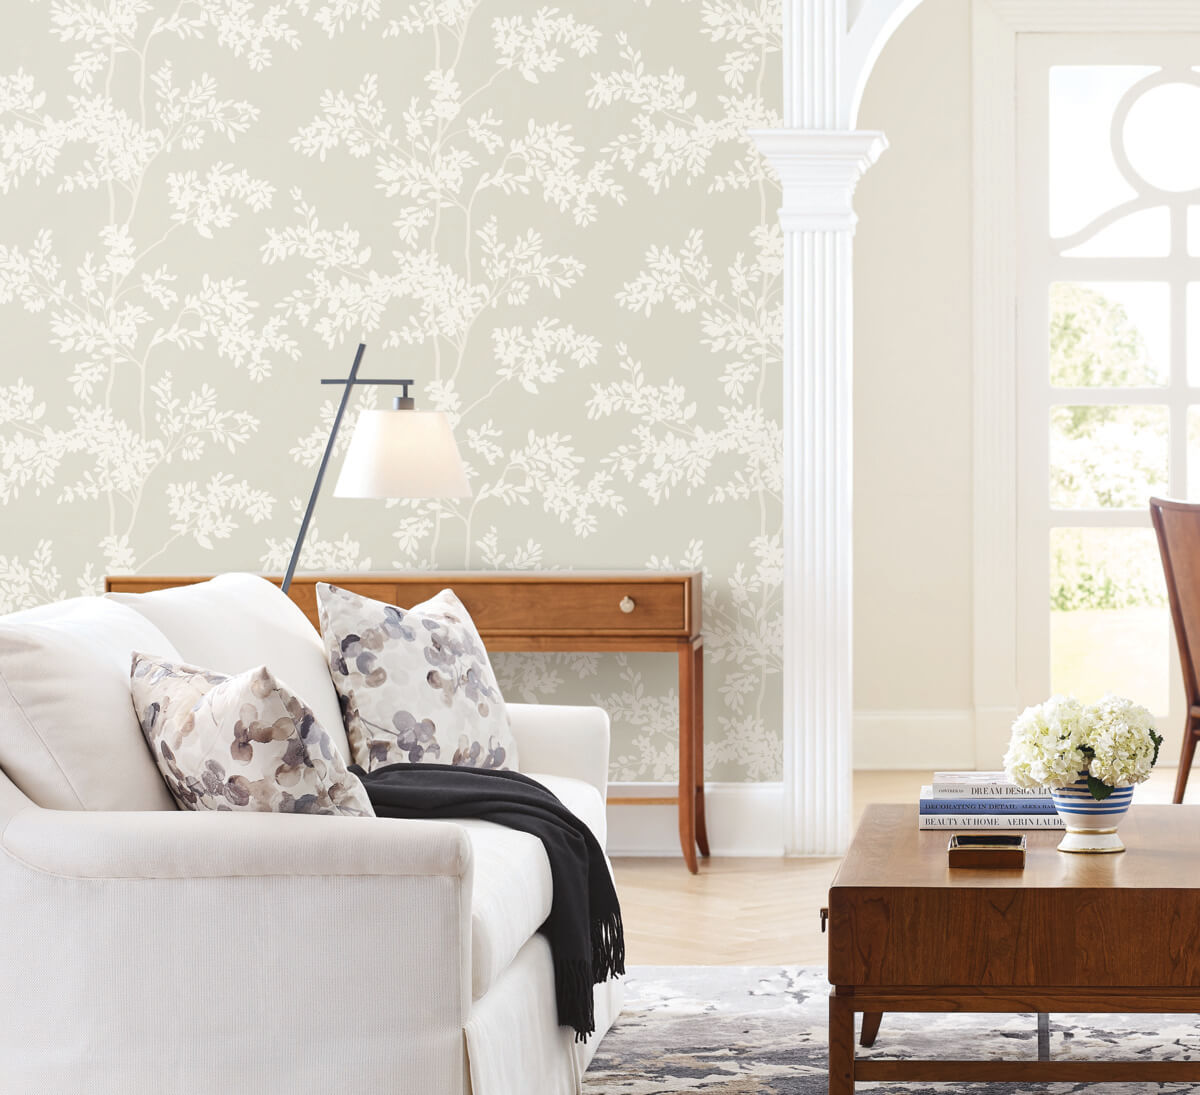 Blooms Second Edition Lunaria Silhouette Wallpaper - Taupe & White